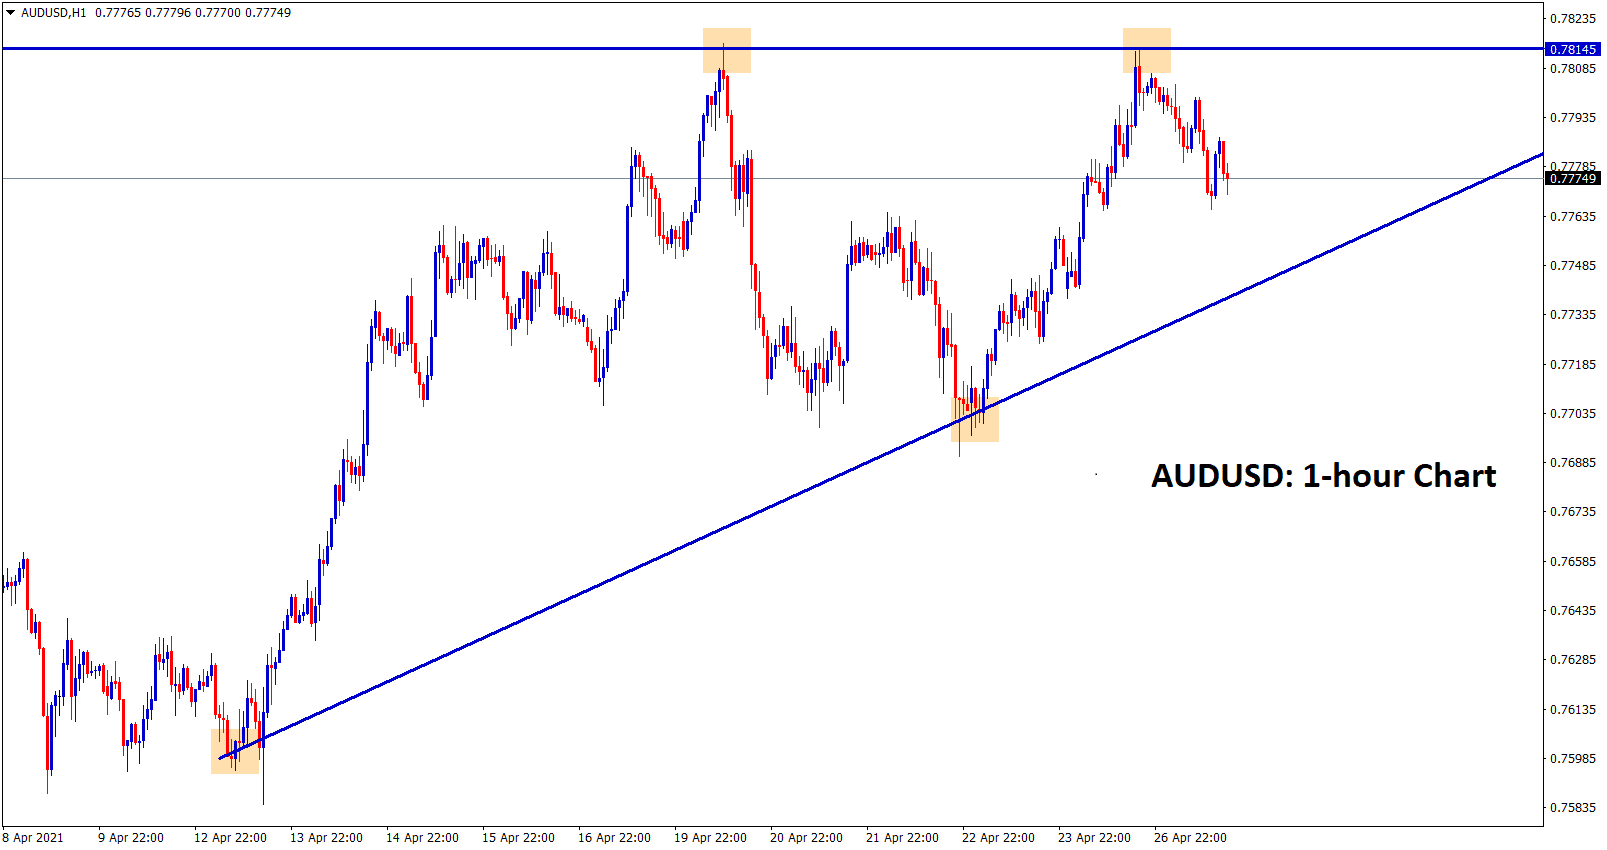 AUDUSD formed an Ascending Triangle pattern